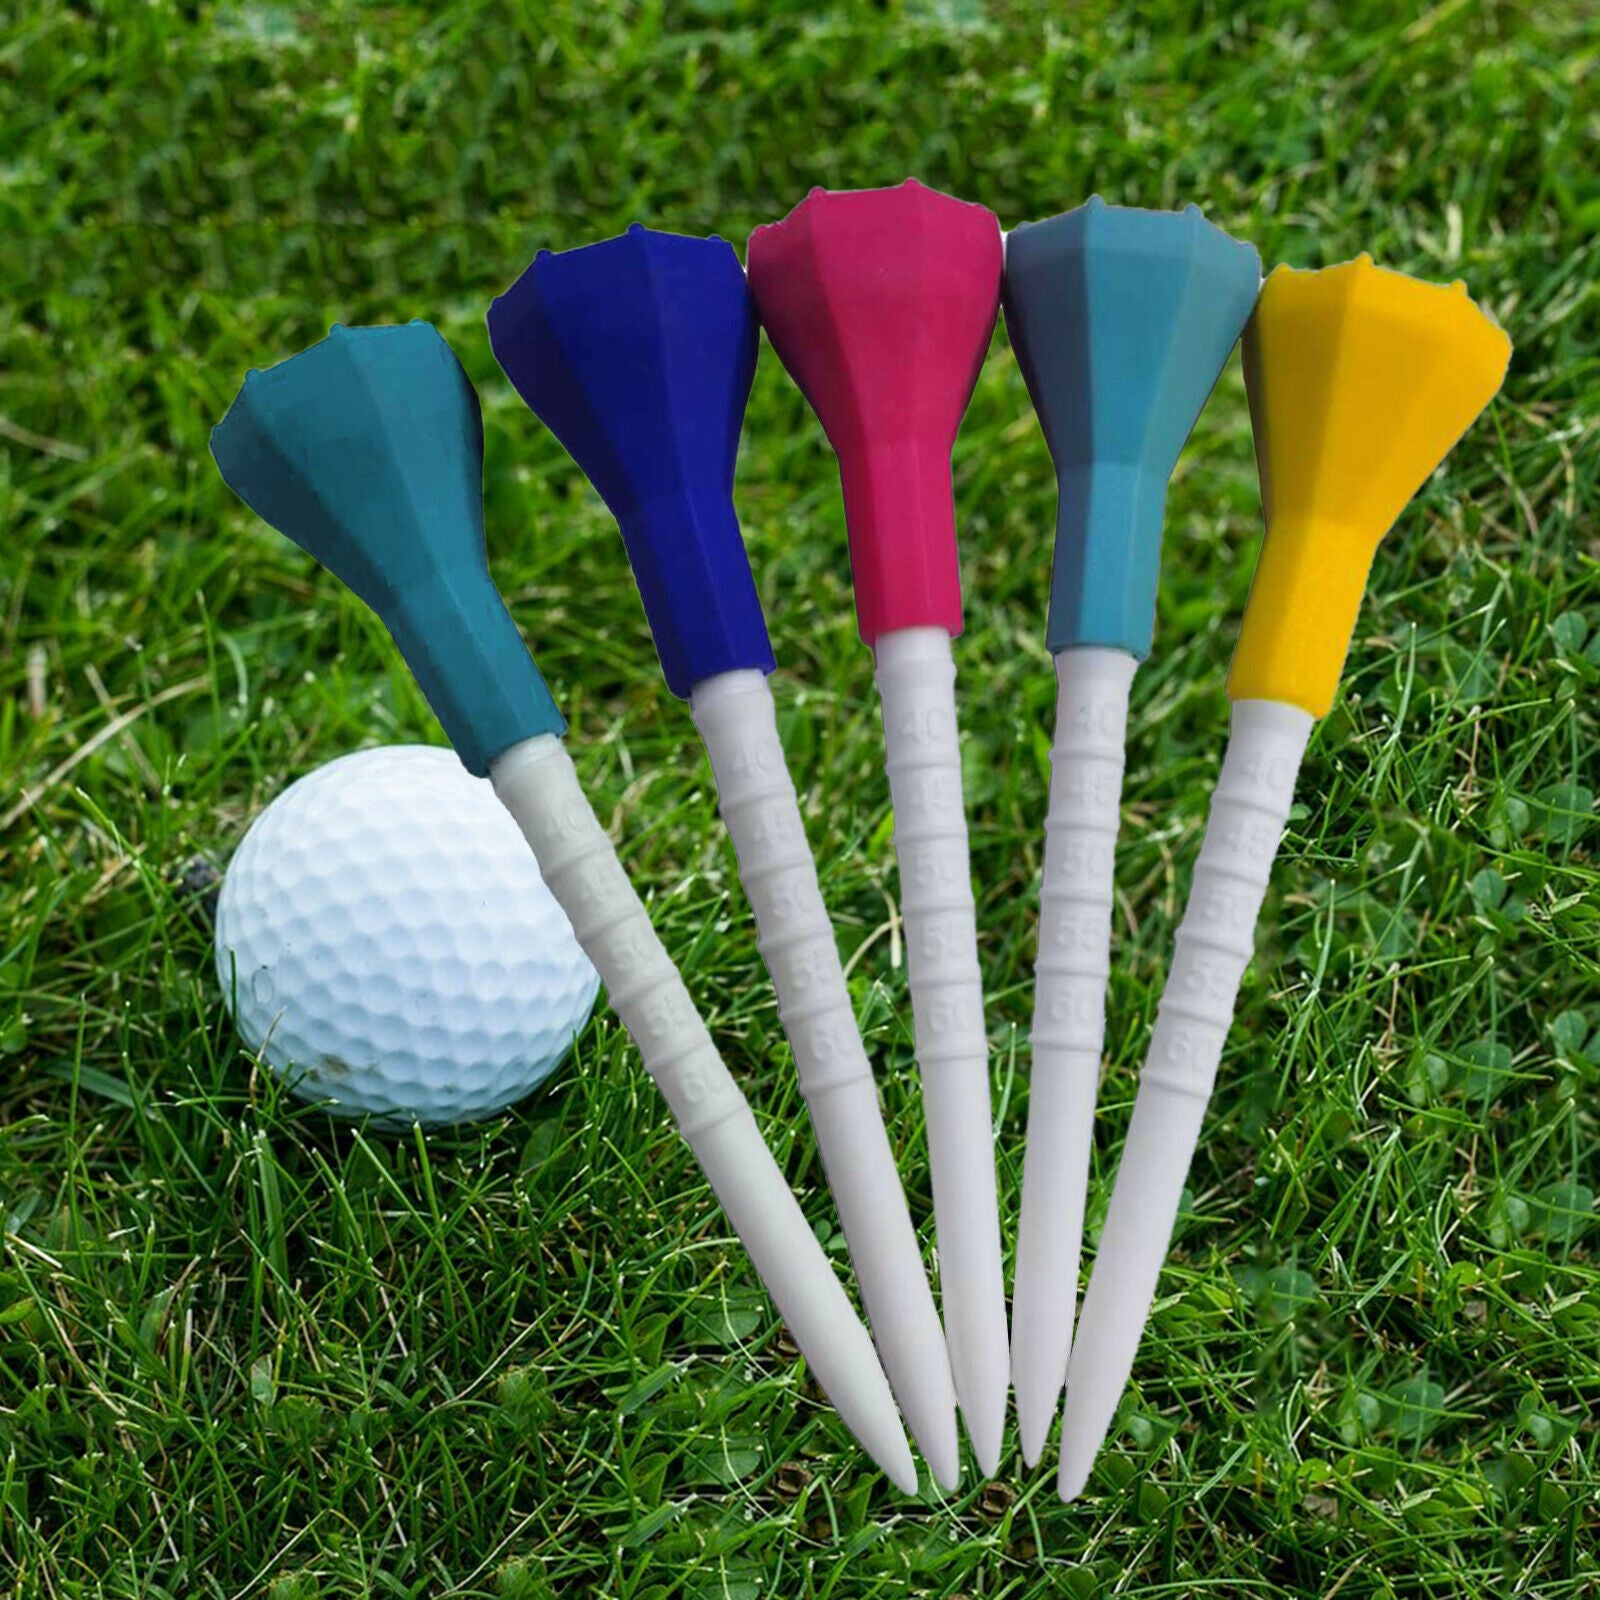 5x Plastic Golf Tees 87mm Big Cup Rubber Cover Top Golf Tee Ball Holder Tool